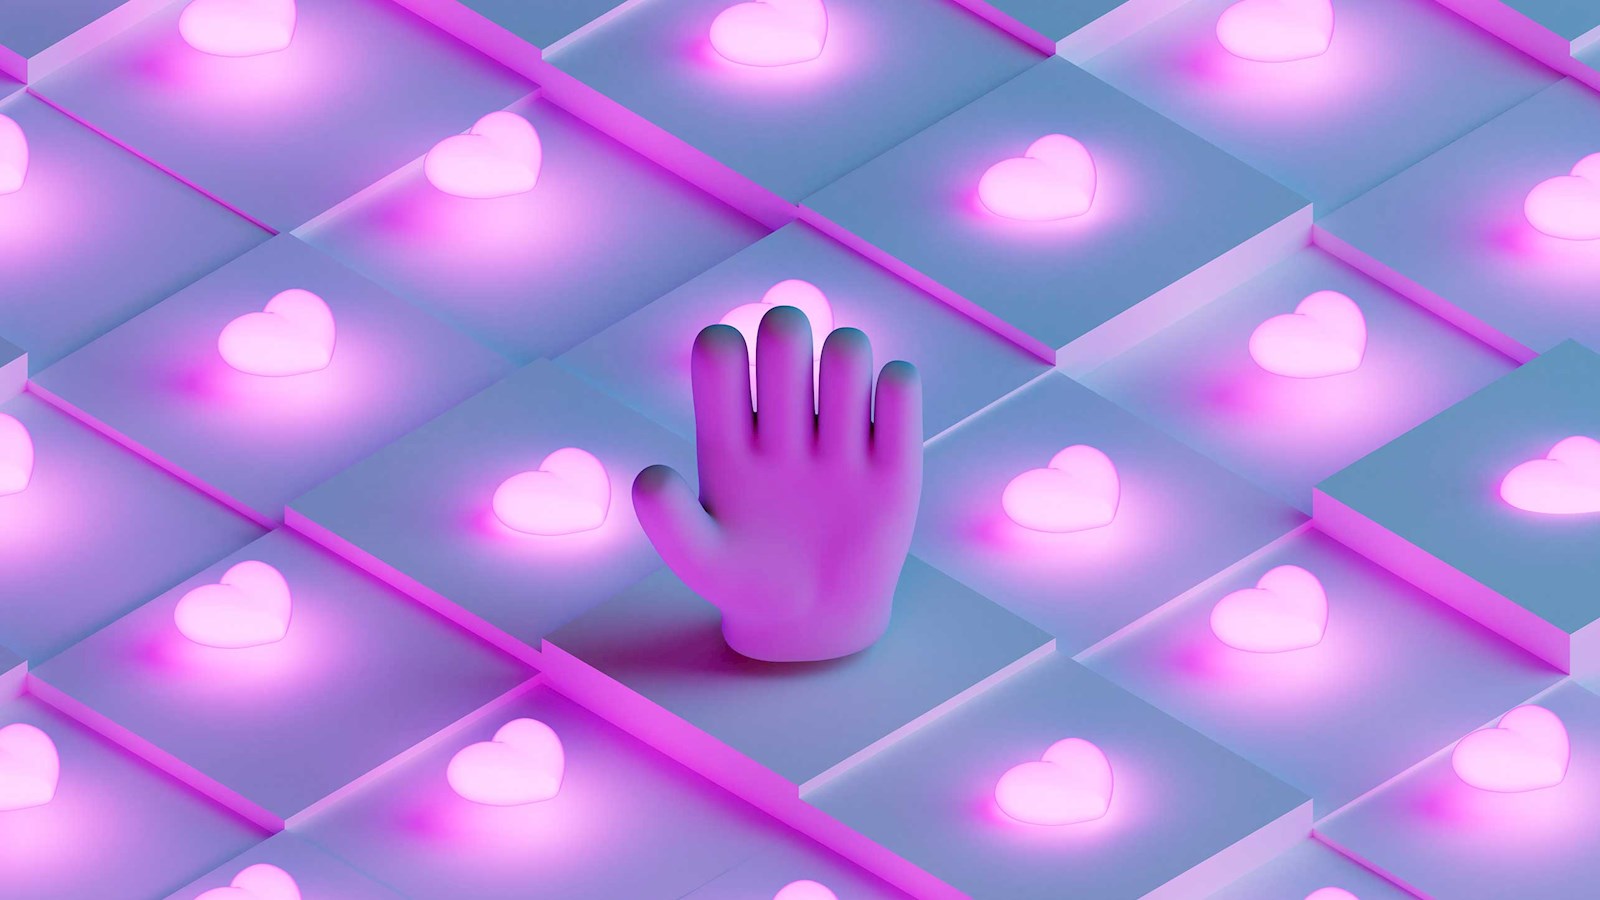 A pink hand surrounded by light-up love hearts